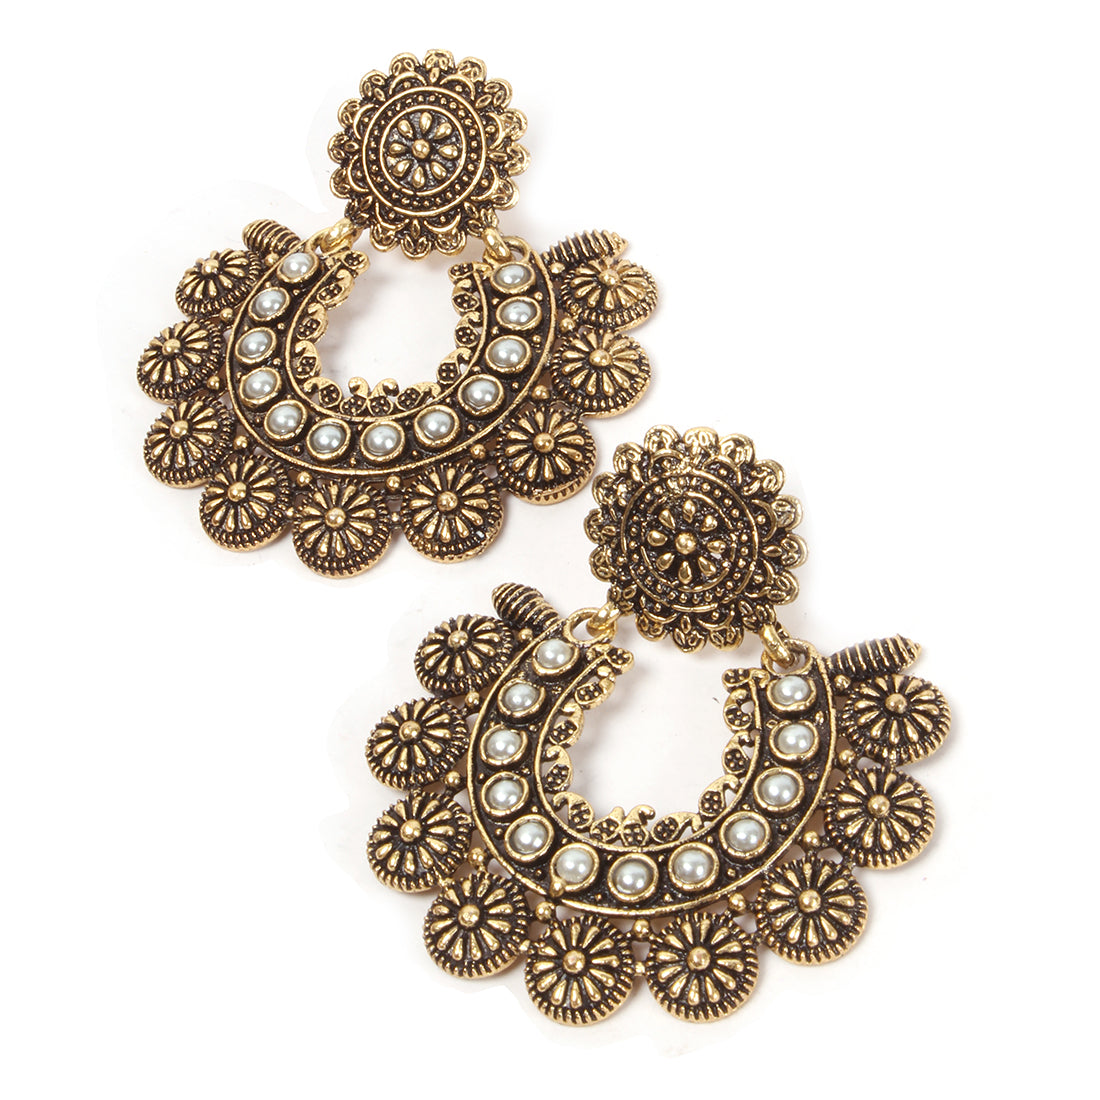 OVERSIZED HANDCRAFTED ETHNIC GOLD-TONED WHITE RHINESTONE STUDDED DROP EARRINGS